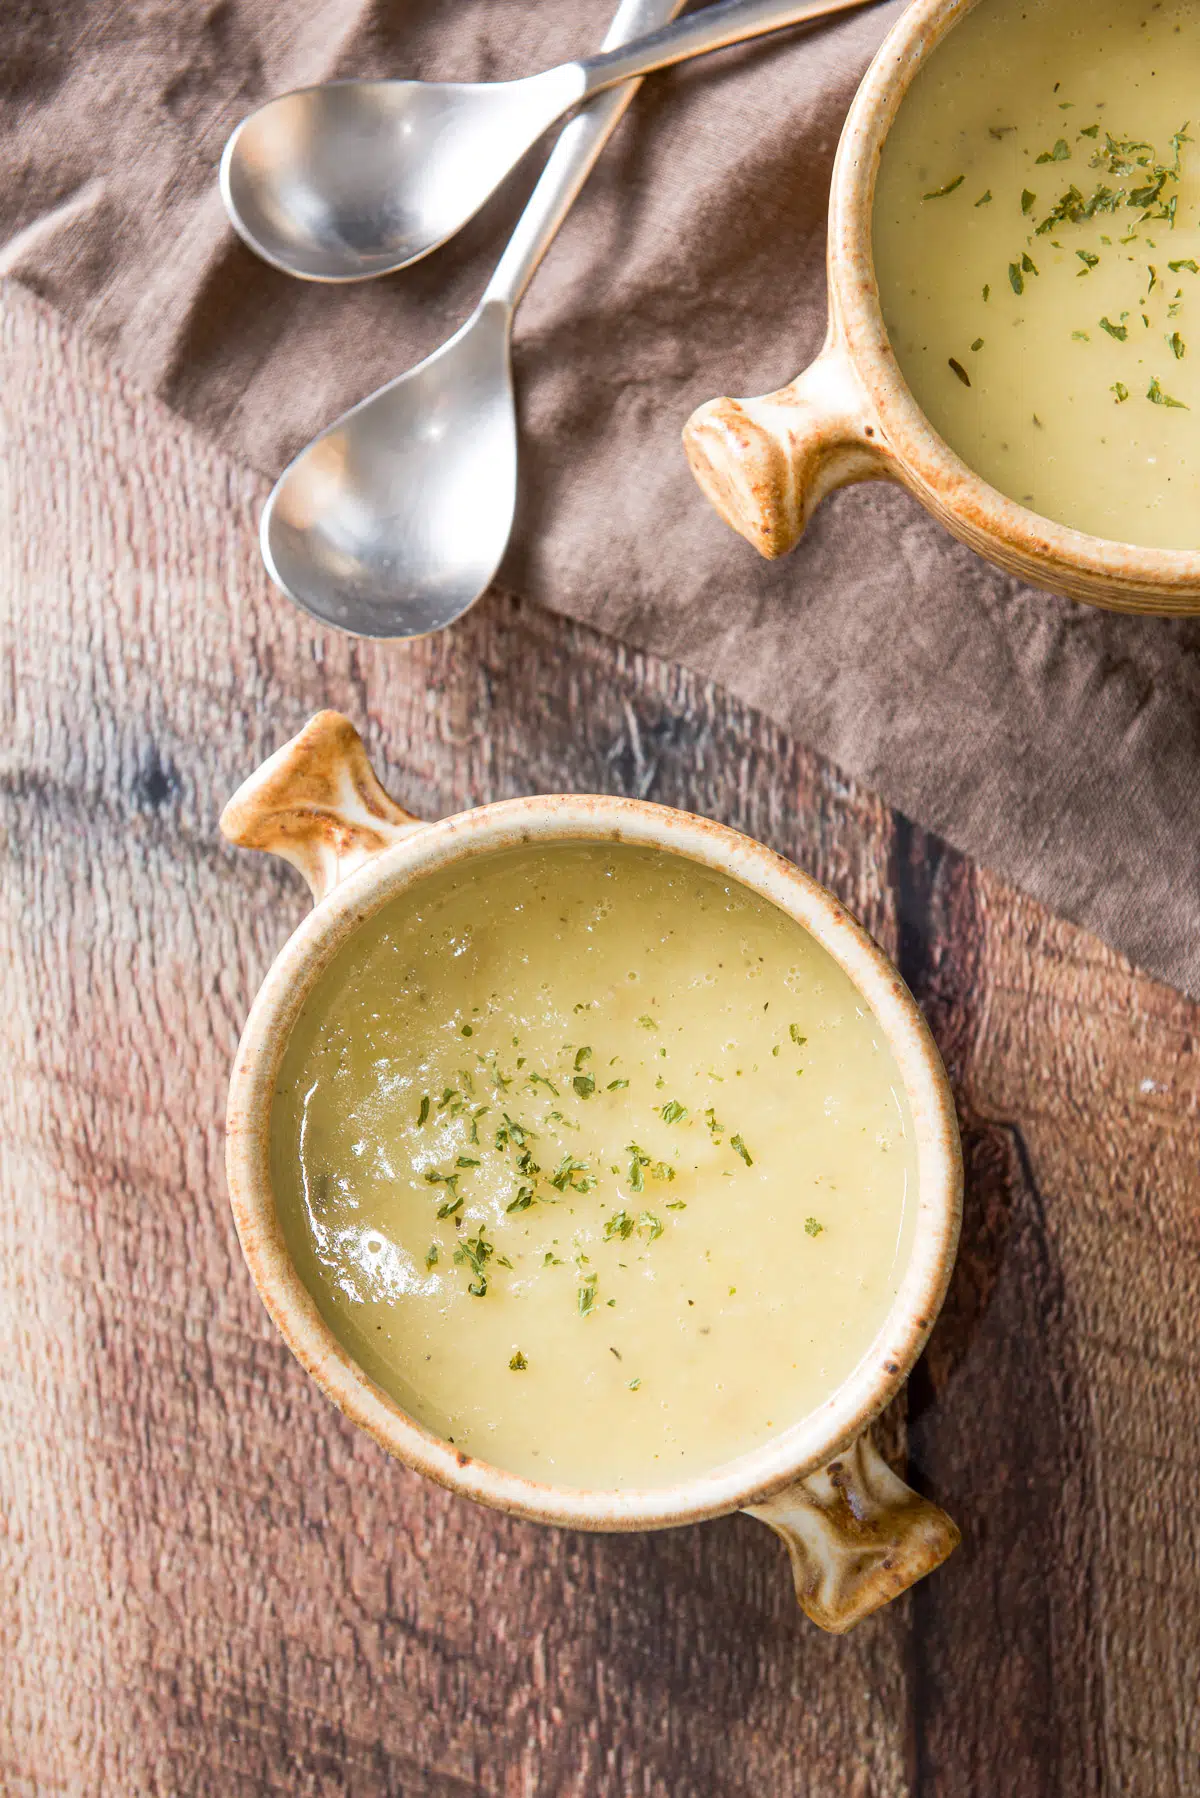 Overhead view of two crocks of leek soup with a napkin and 2 spoons